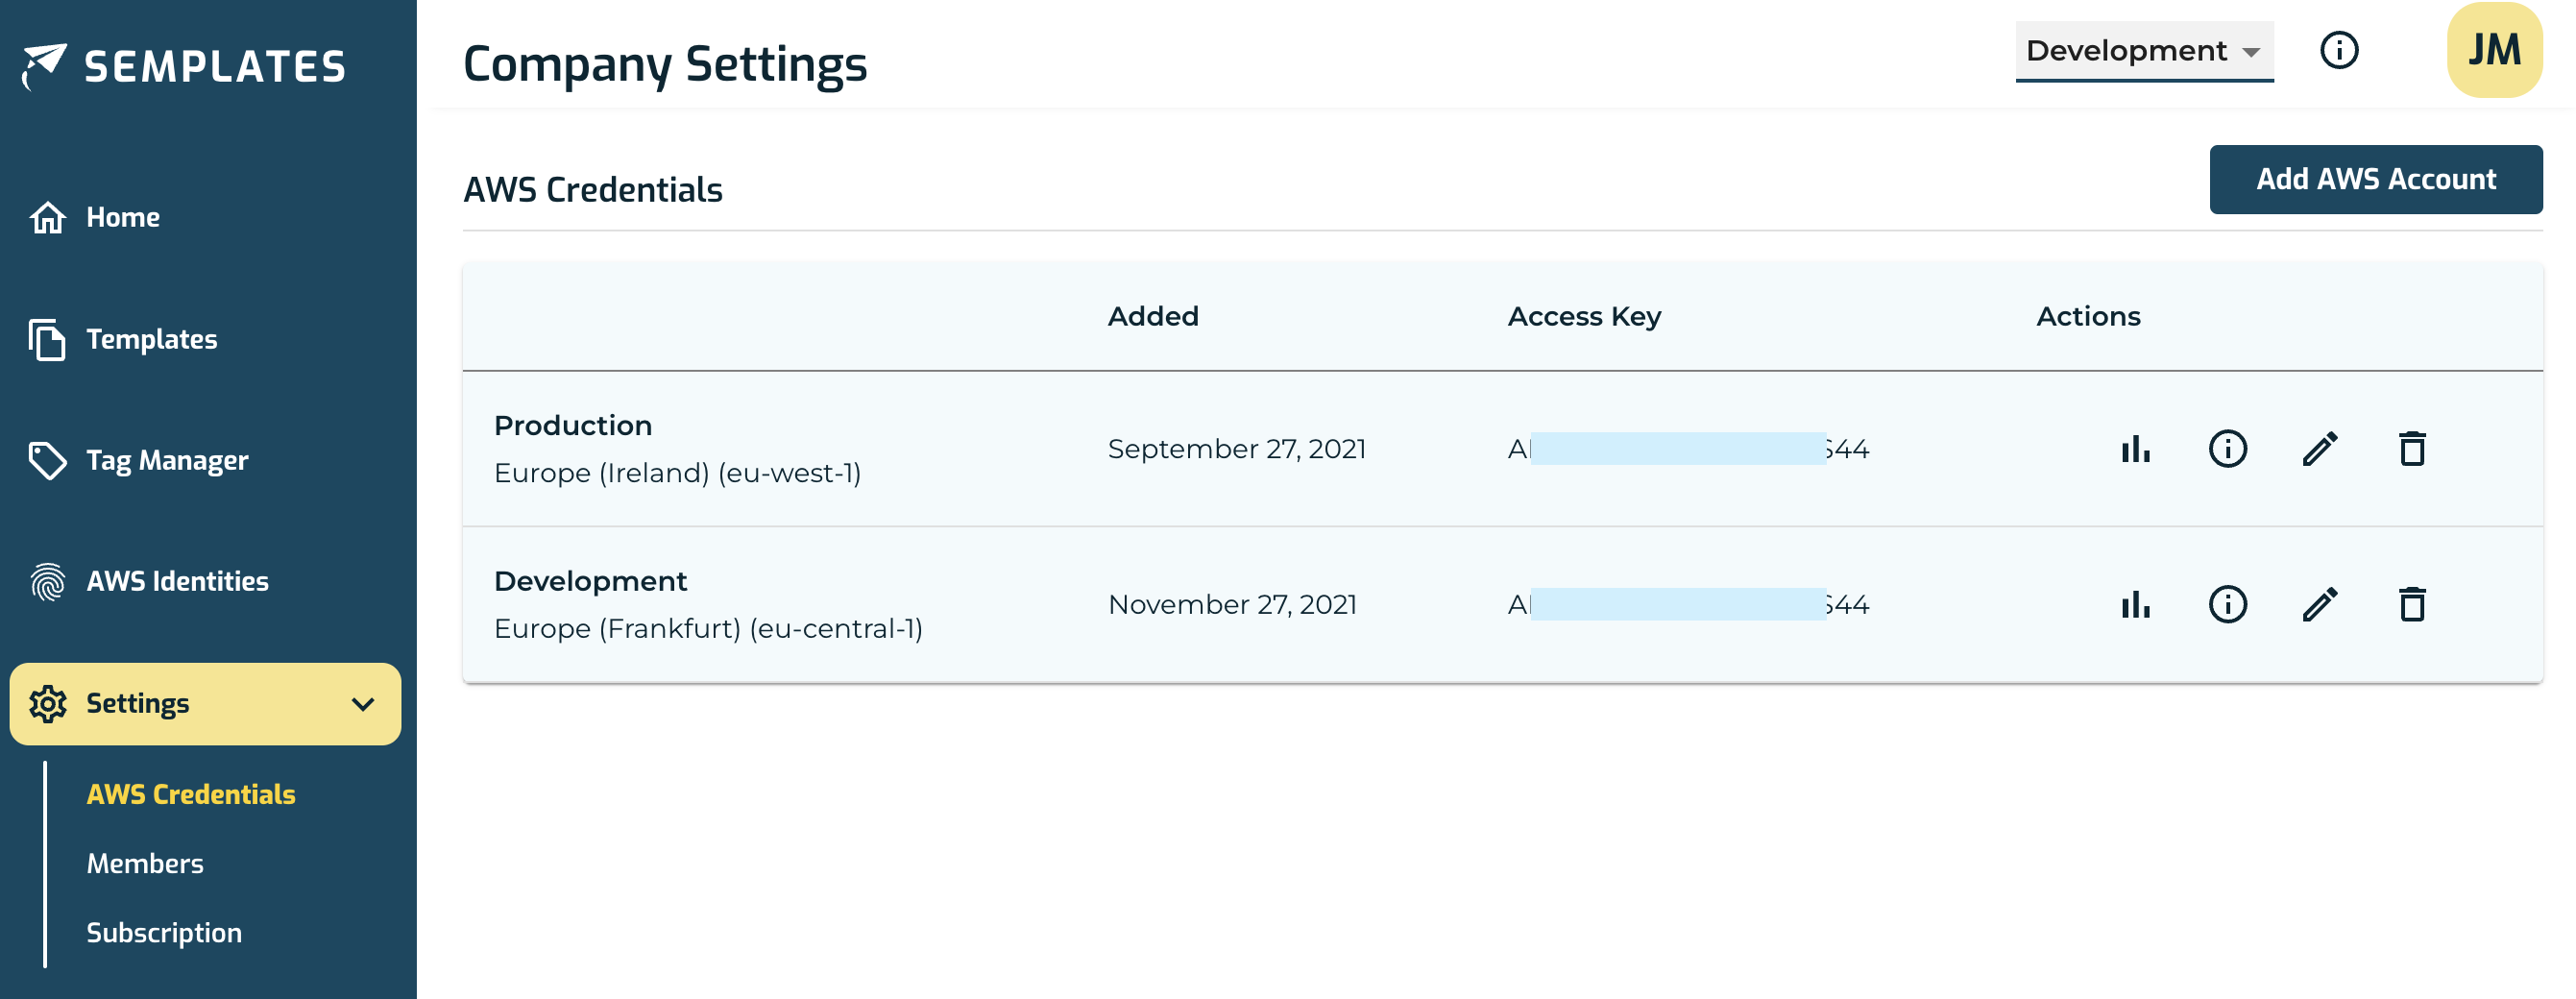 Account Overview of AWS Accounts connected within Semplates